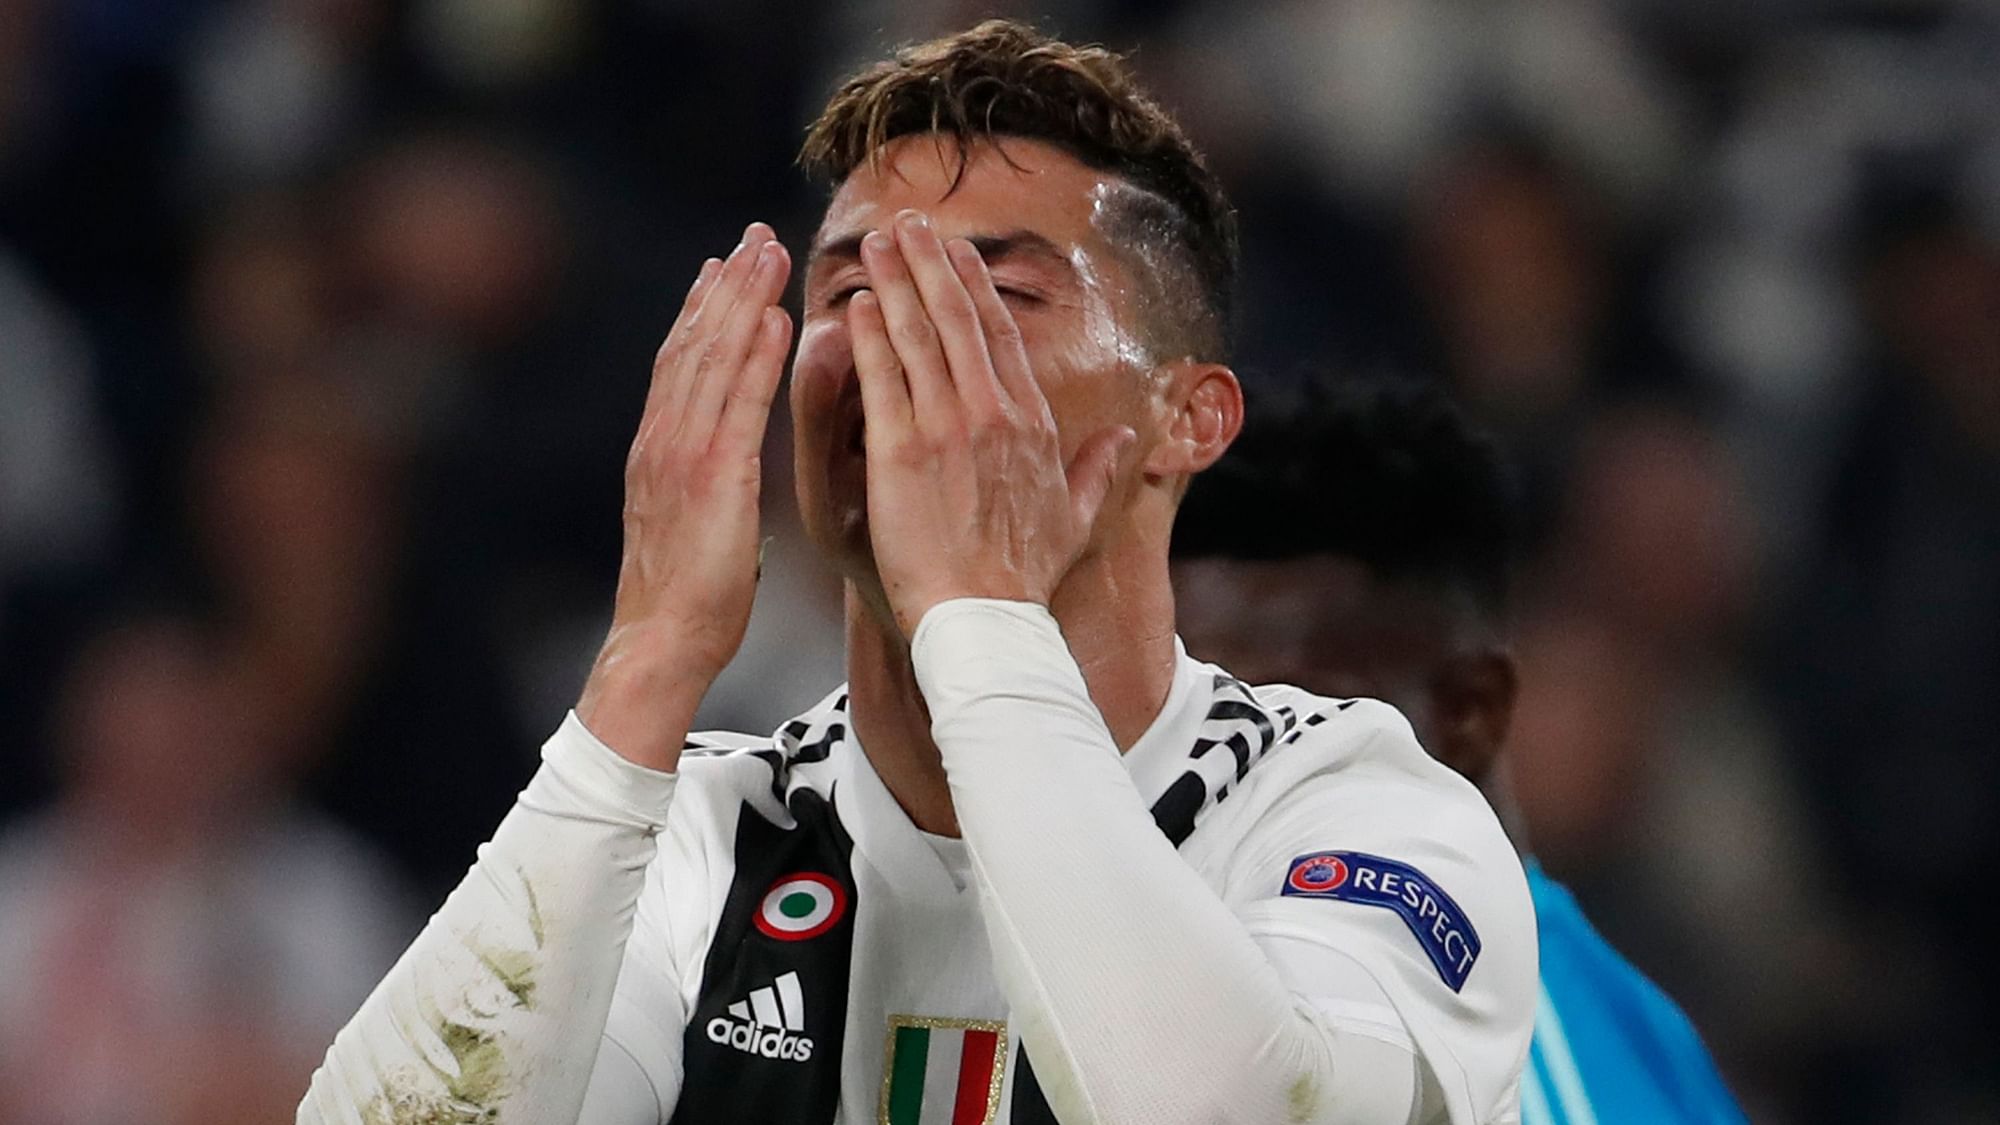 Despite scoring in both the away and home leg of the Champions League tie, Cristiano Ronaldo and Juventus had to face disappointment against Ajax.